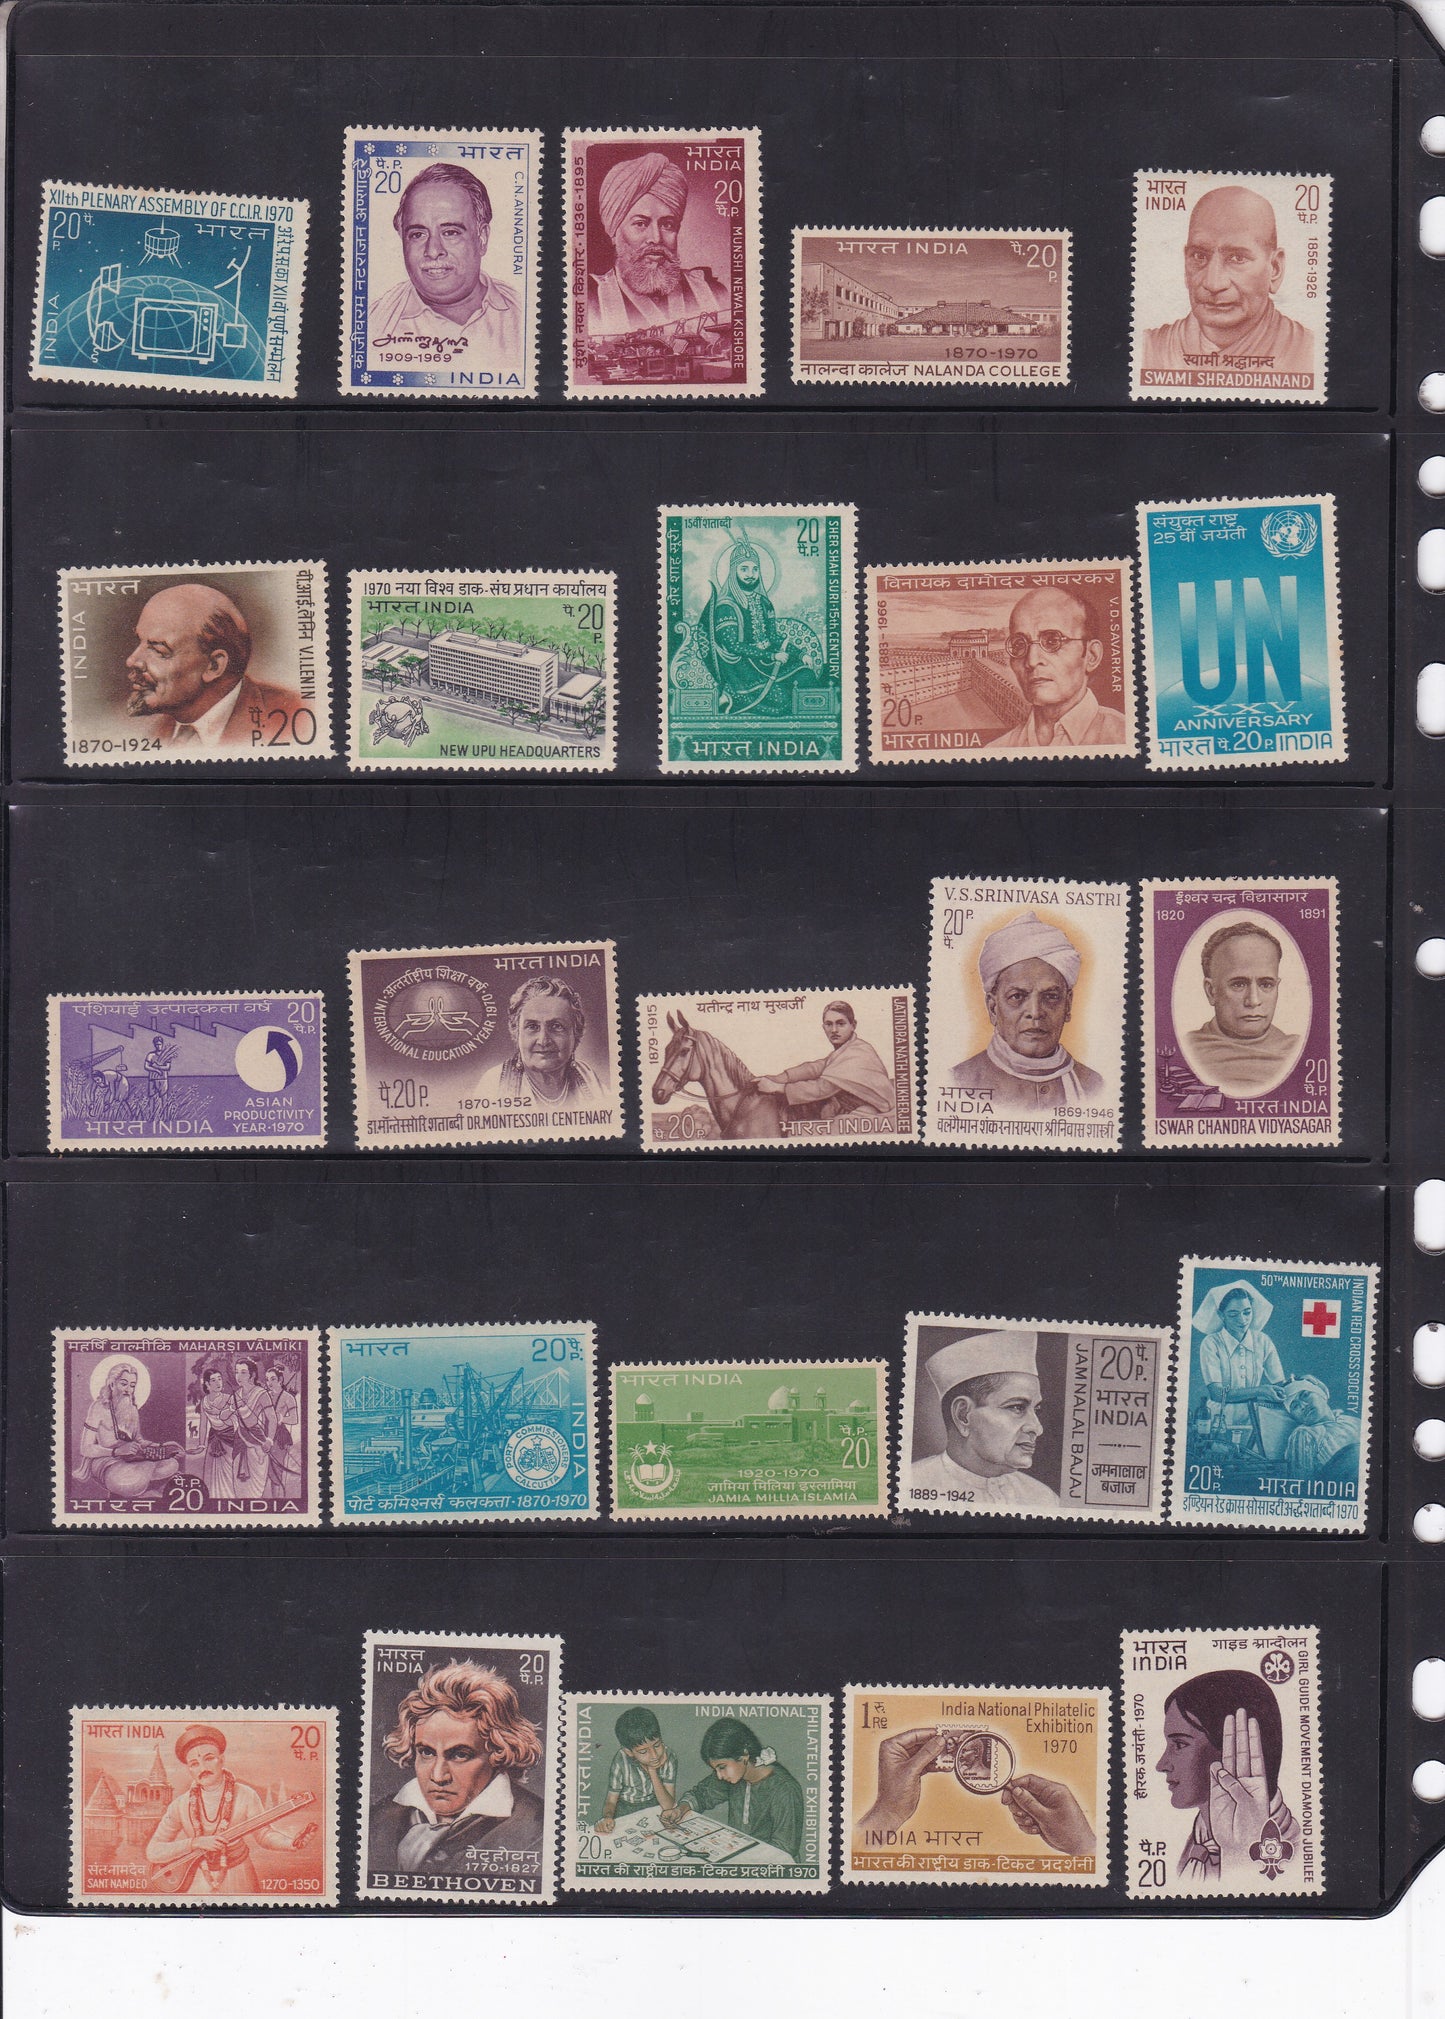 India-1970 Full Year pack MNH Stamps